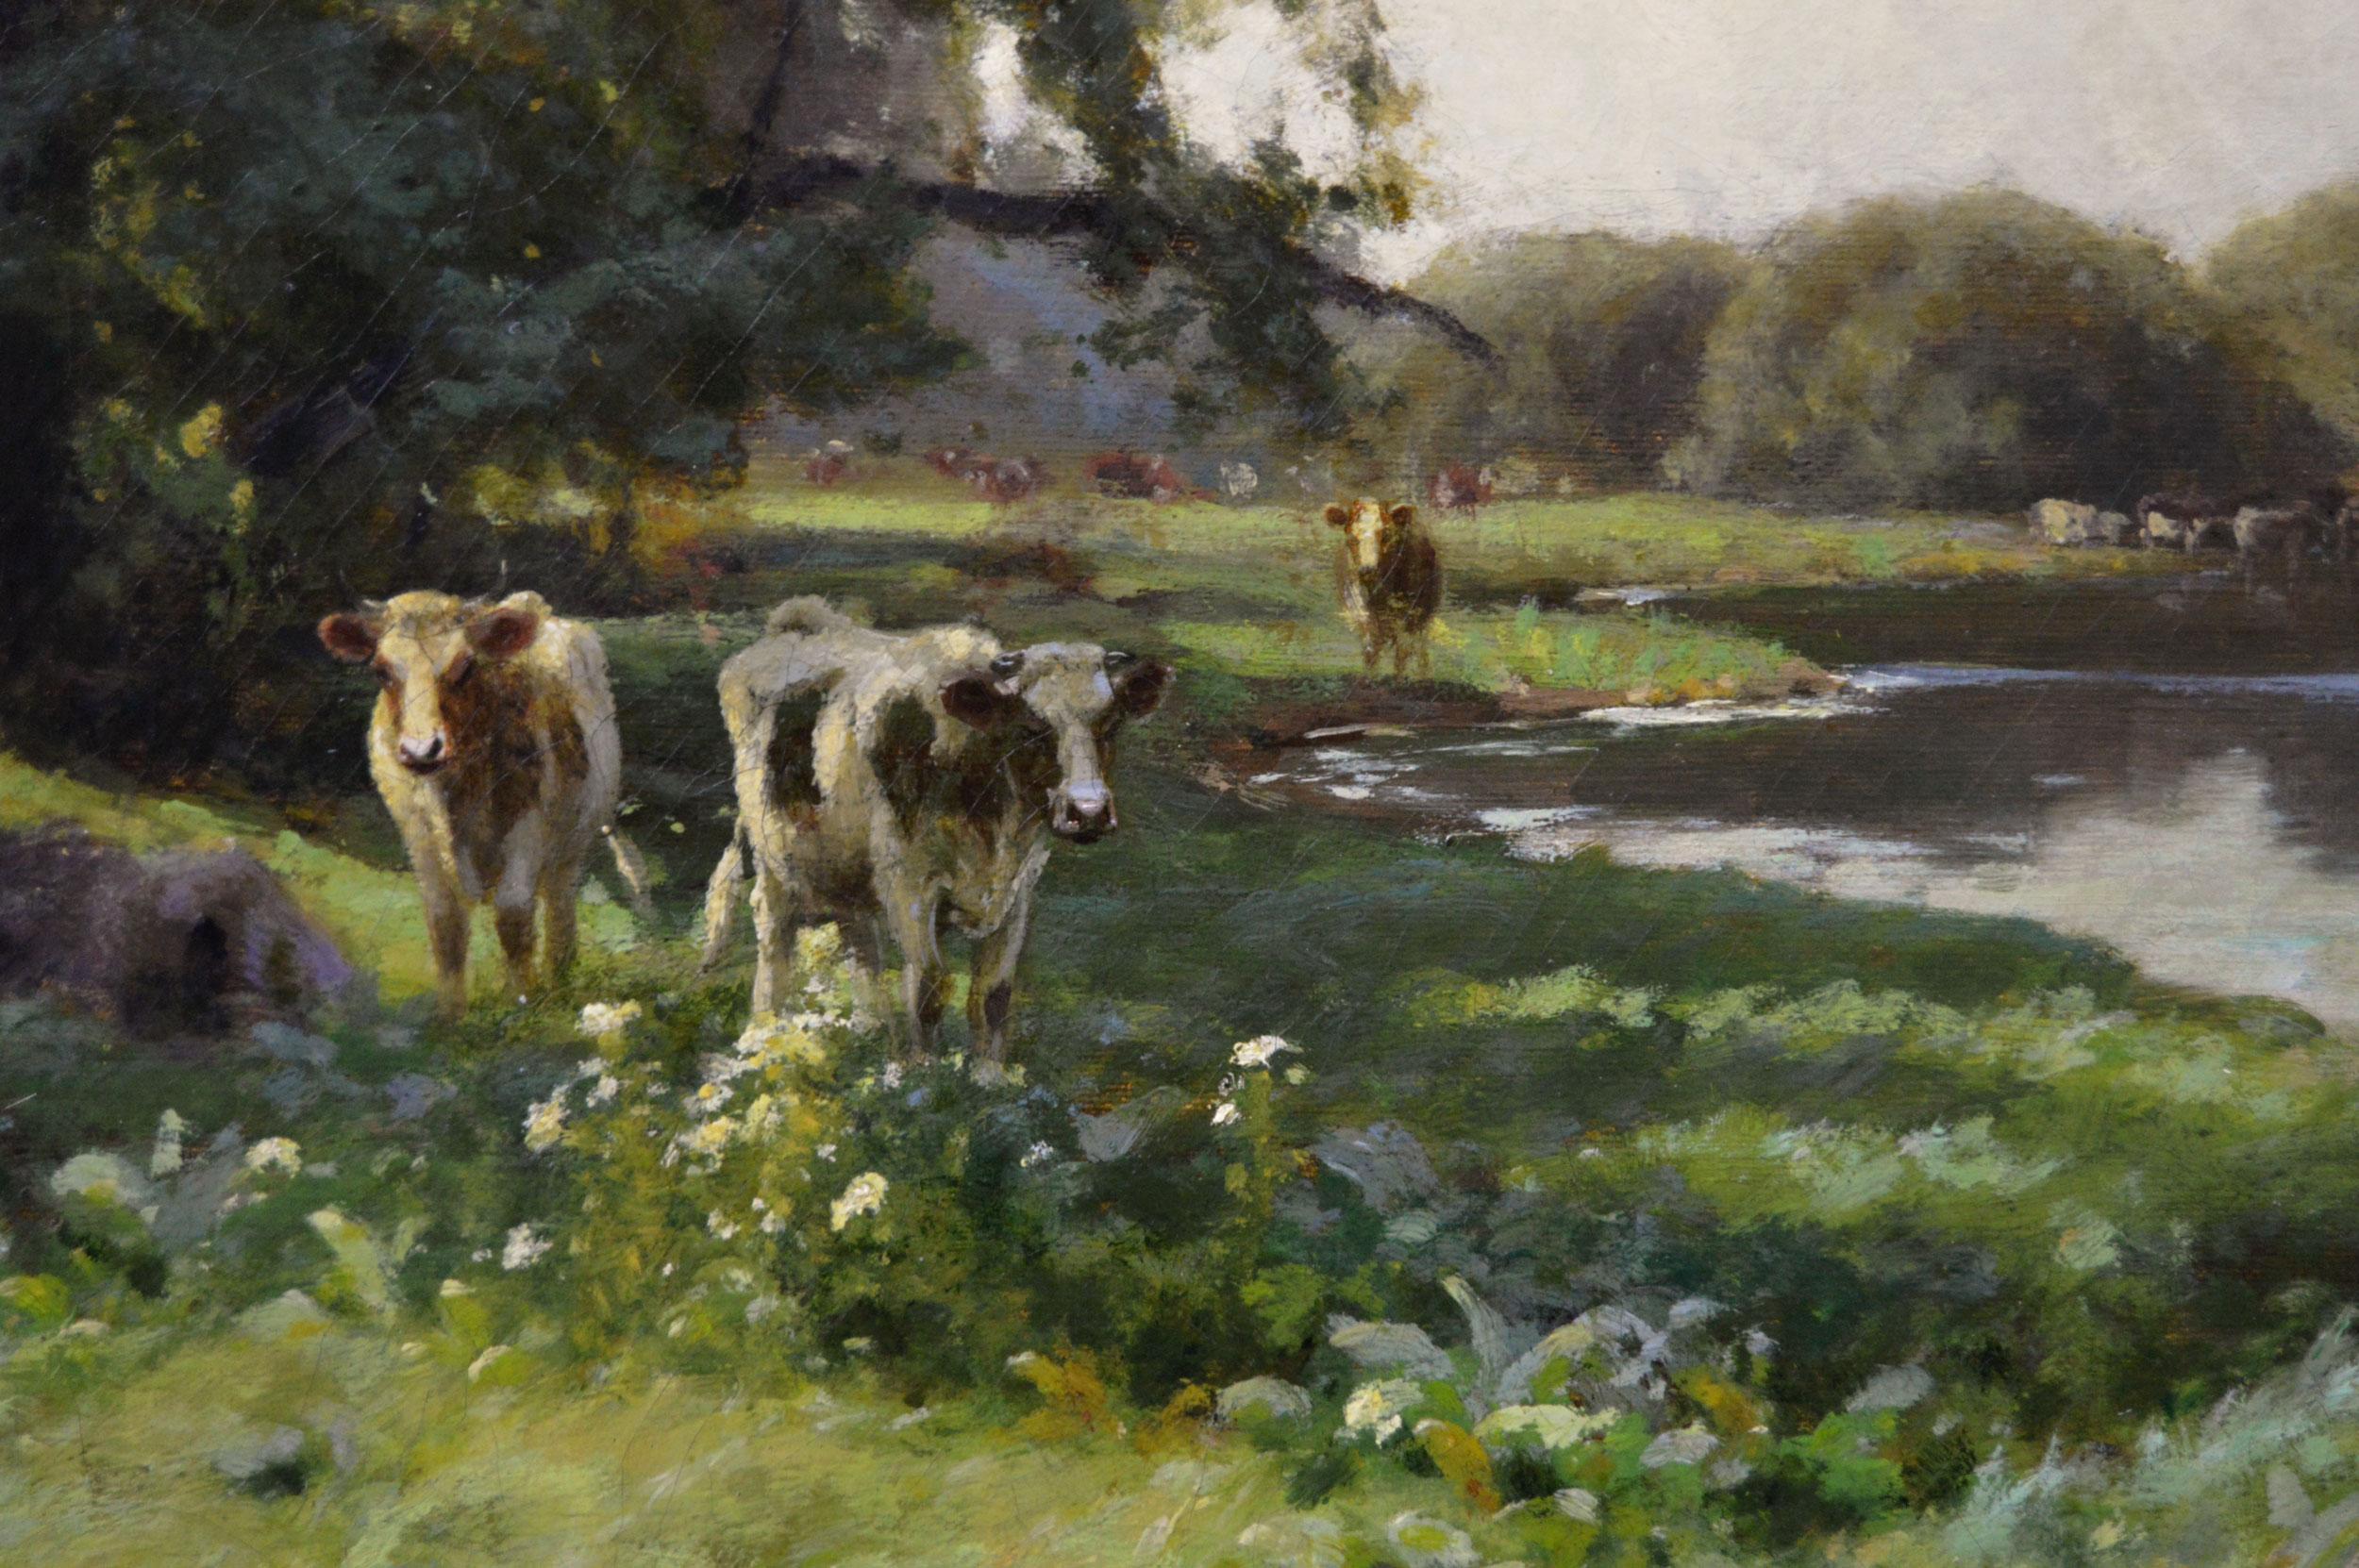 19th Century landscape oil painting of a woman with cattle near a river - Victorian Painting by Arthur Walker Redgate